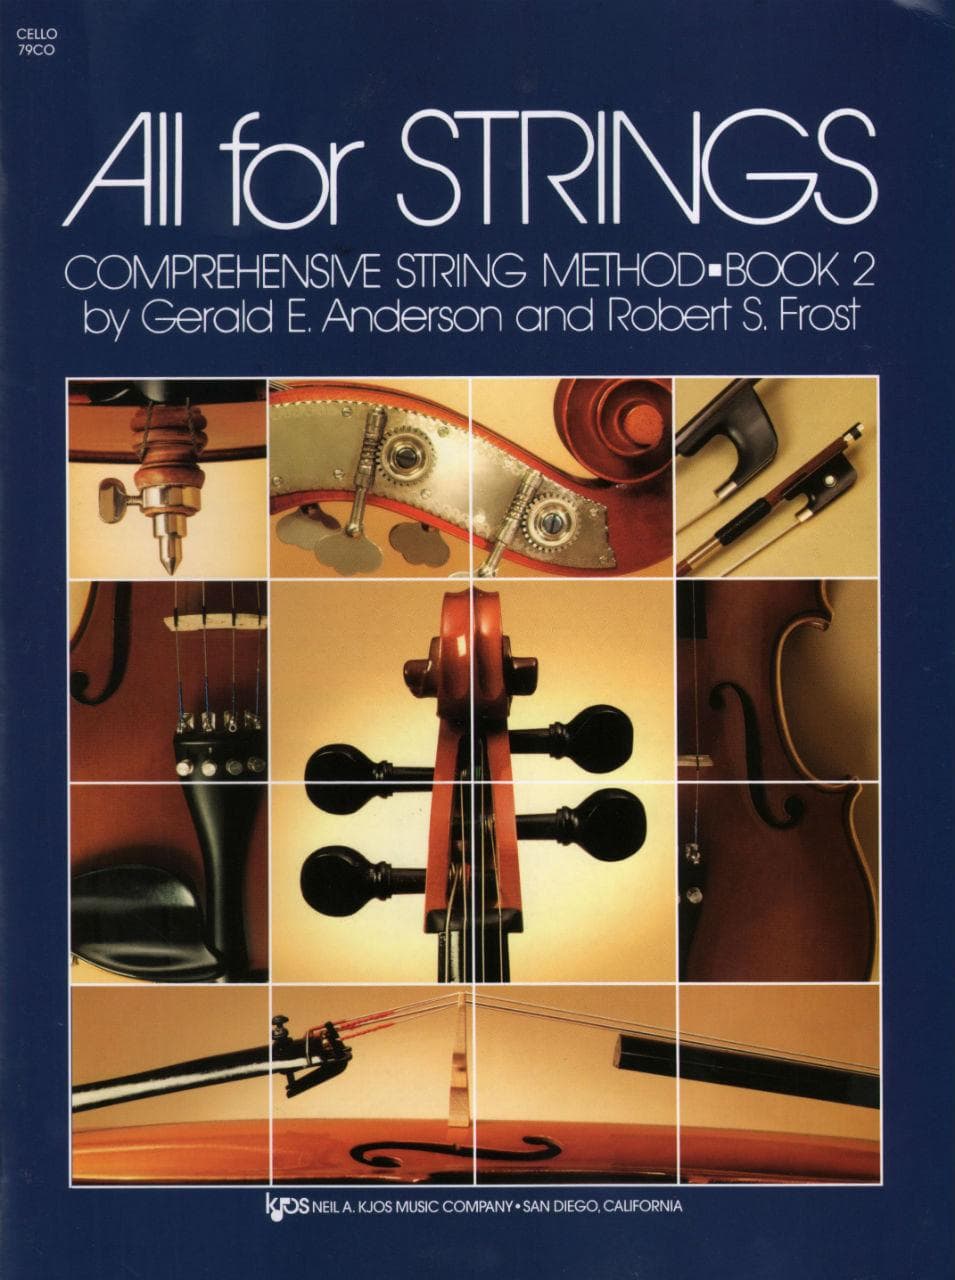 All For Strings Comprehensive String Method - Book 2 for Cello by Gerald E Anderson and Robert S Frost